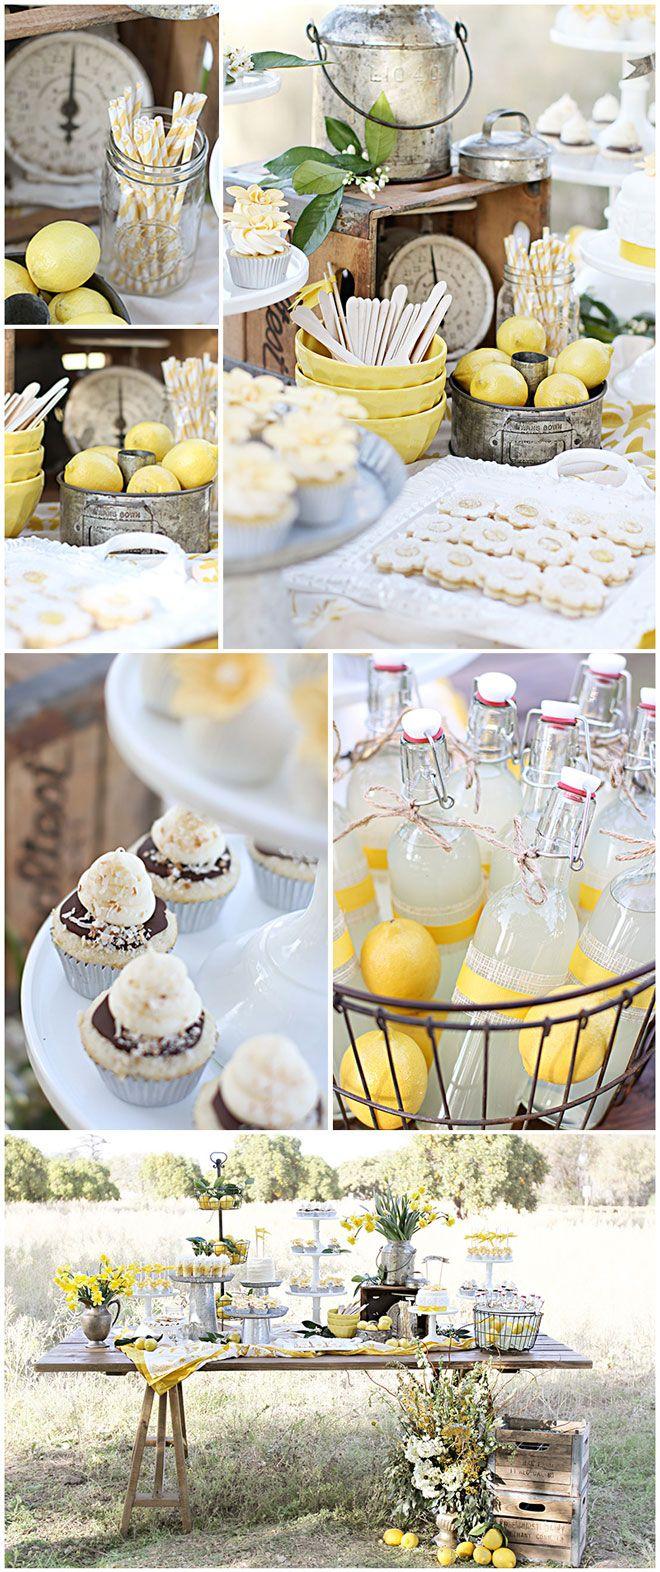 Wedding - Party Time! ~ Themes & Decorations